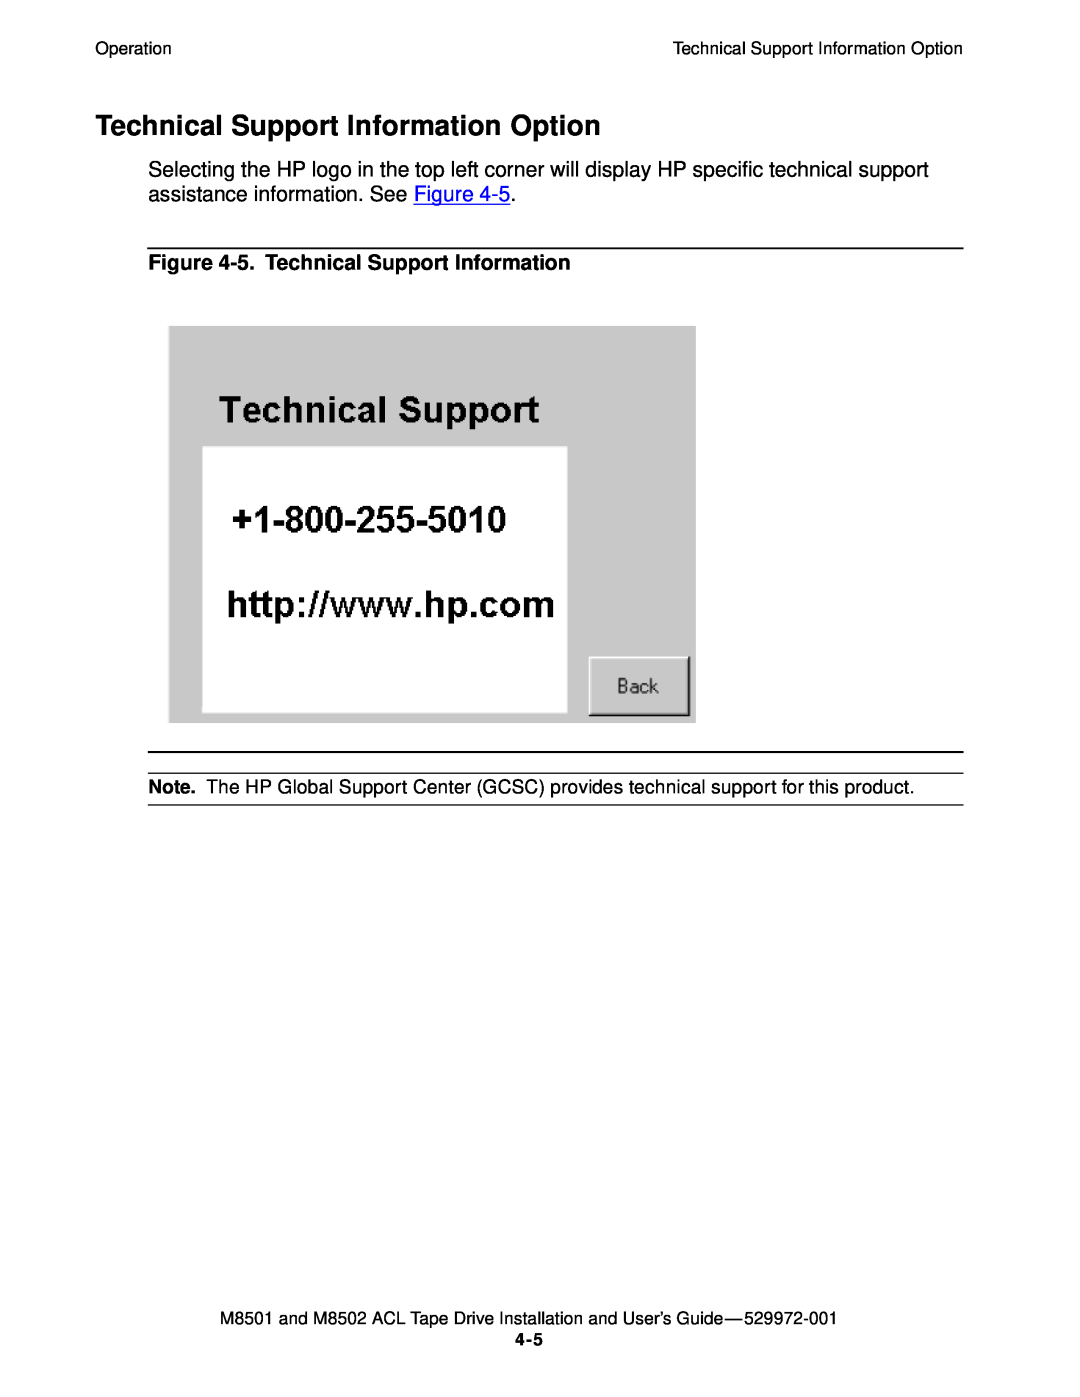 SMC Networks M8501 manual Technical Support Information Option, 5. Technical Support Information, Operation 